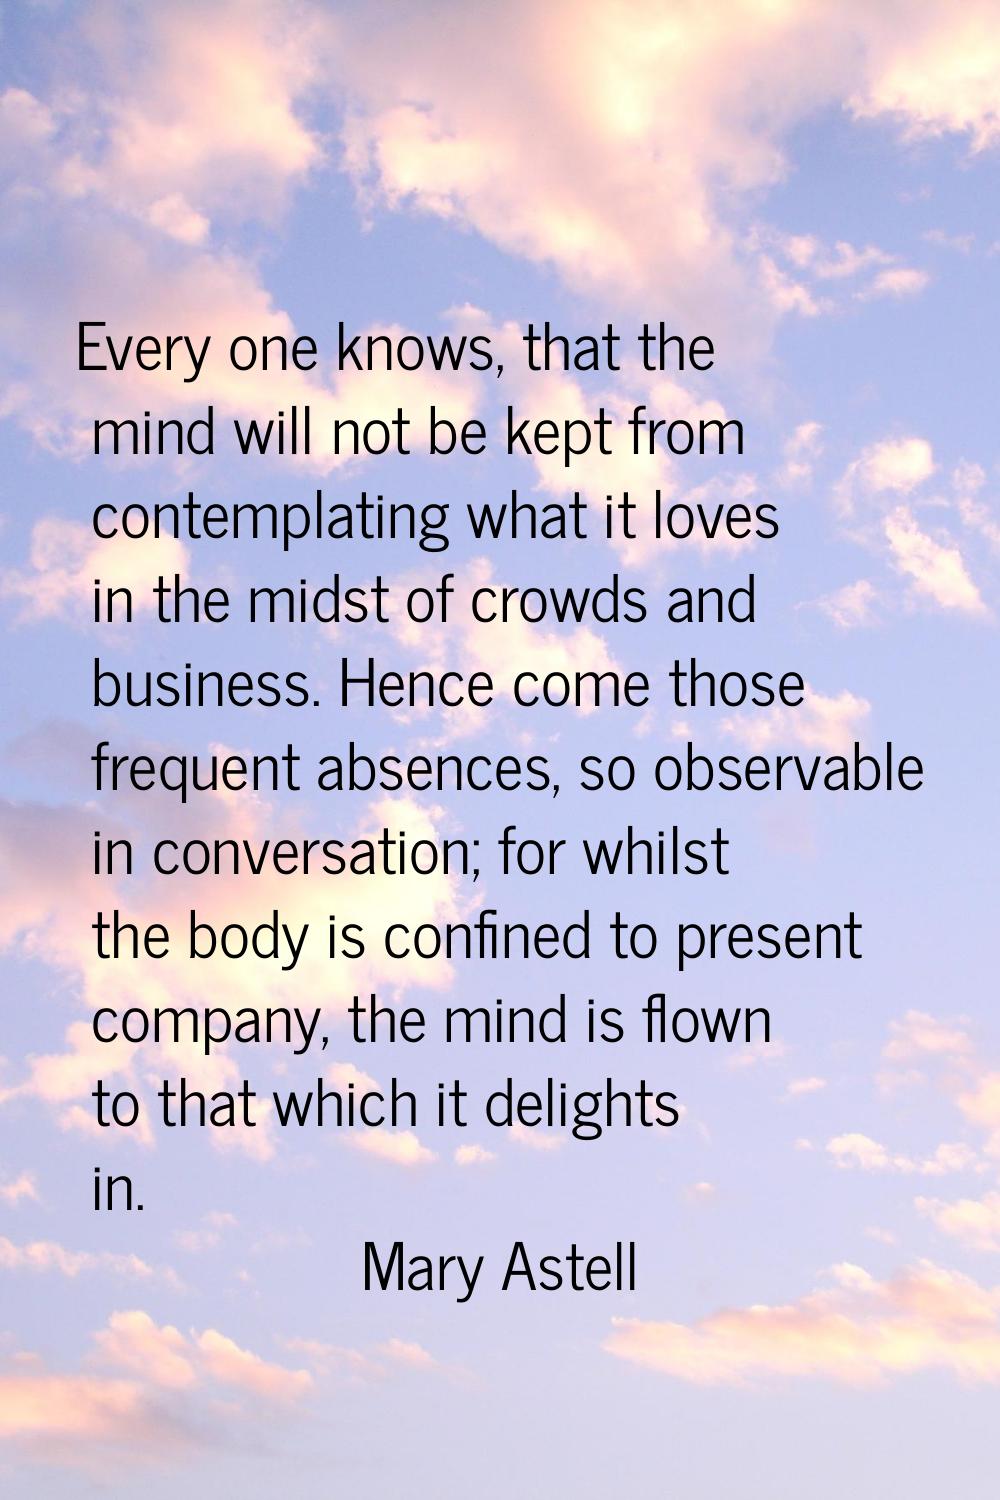 Every one knows, that the mind will not be kept from contemplating what it loves in the midst of cr